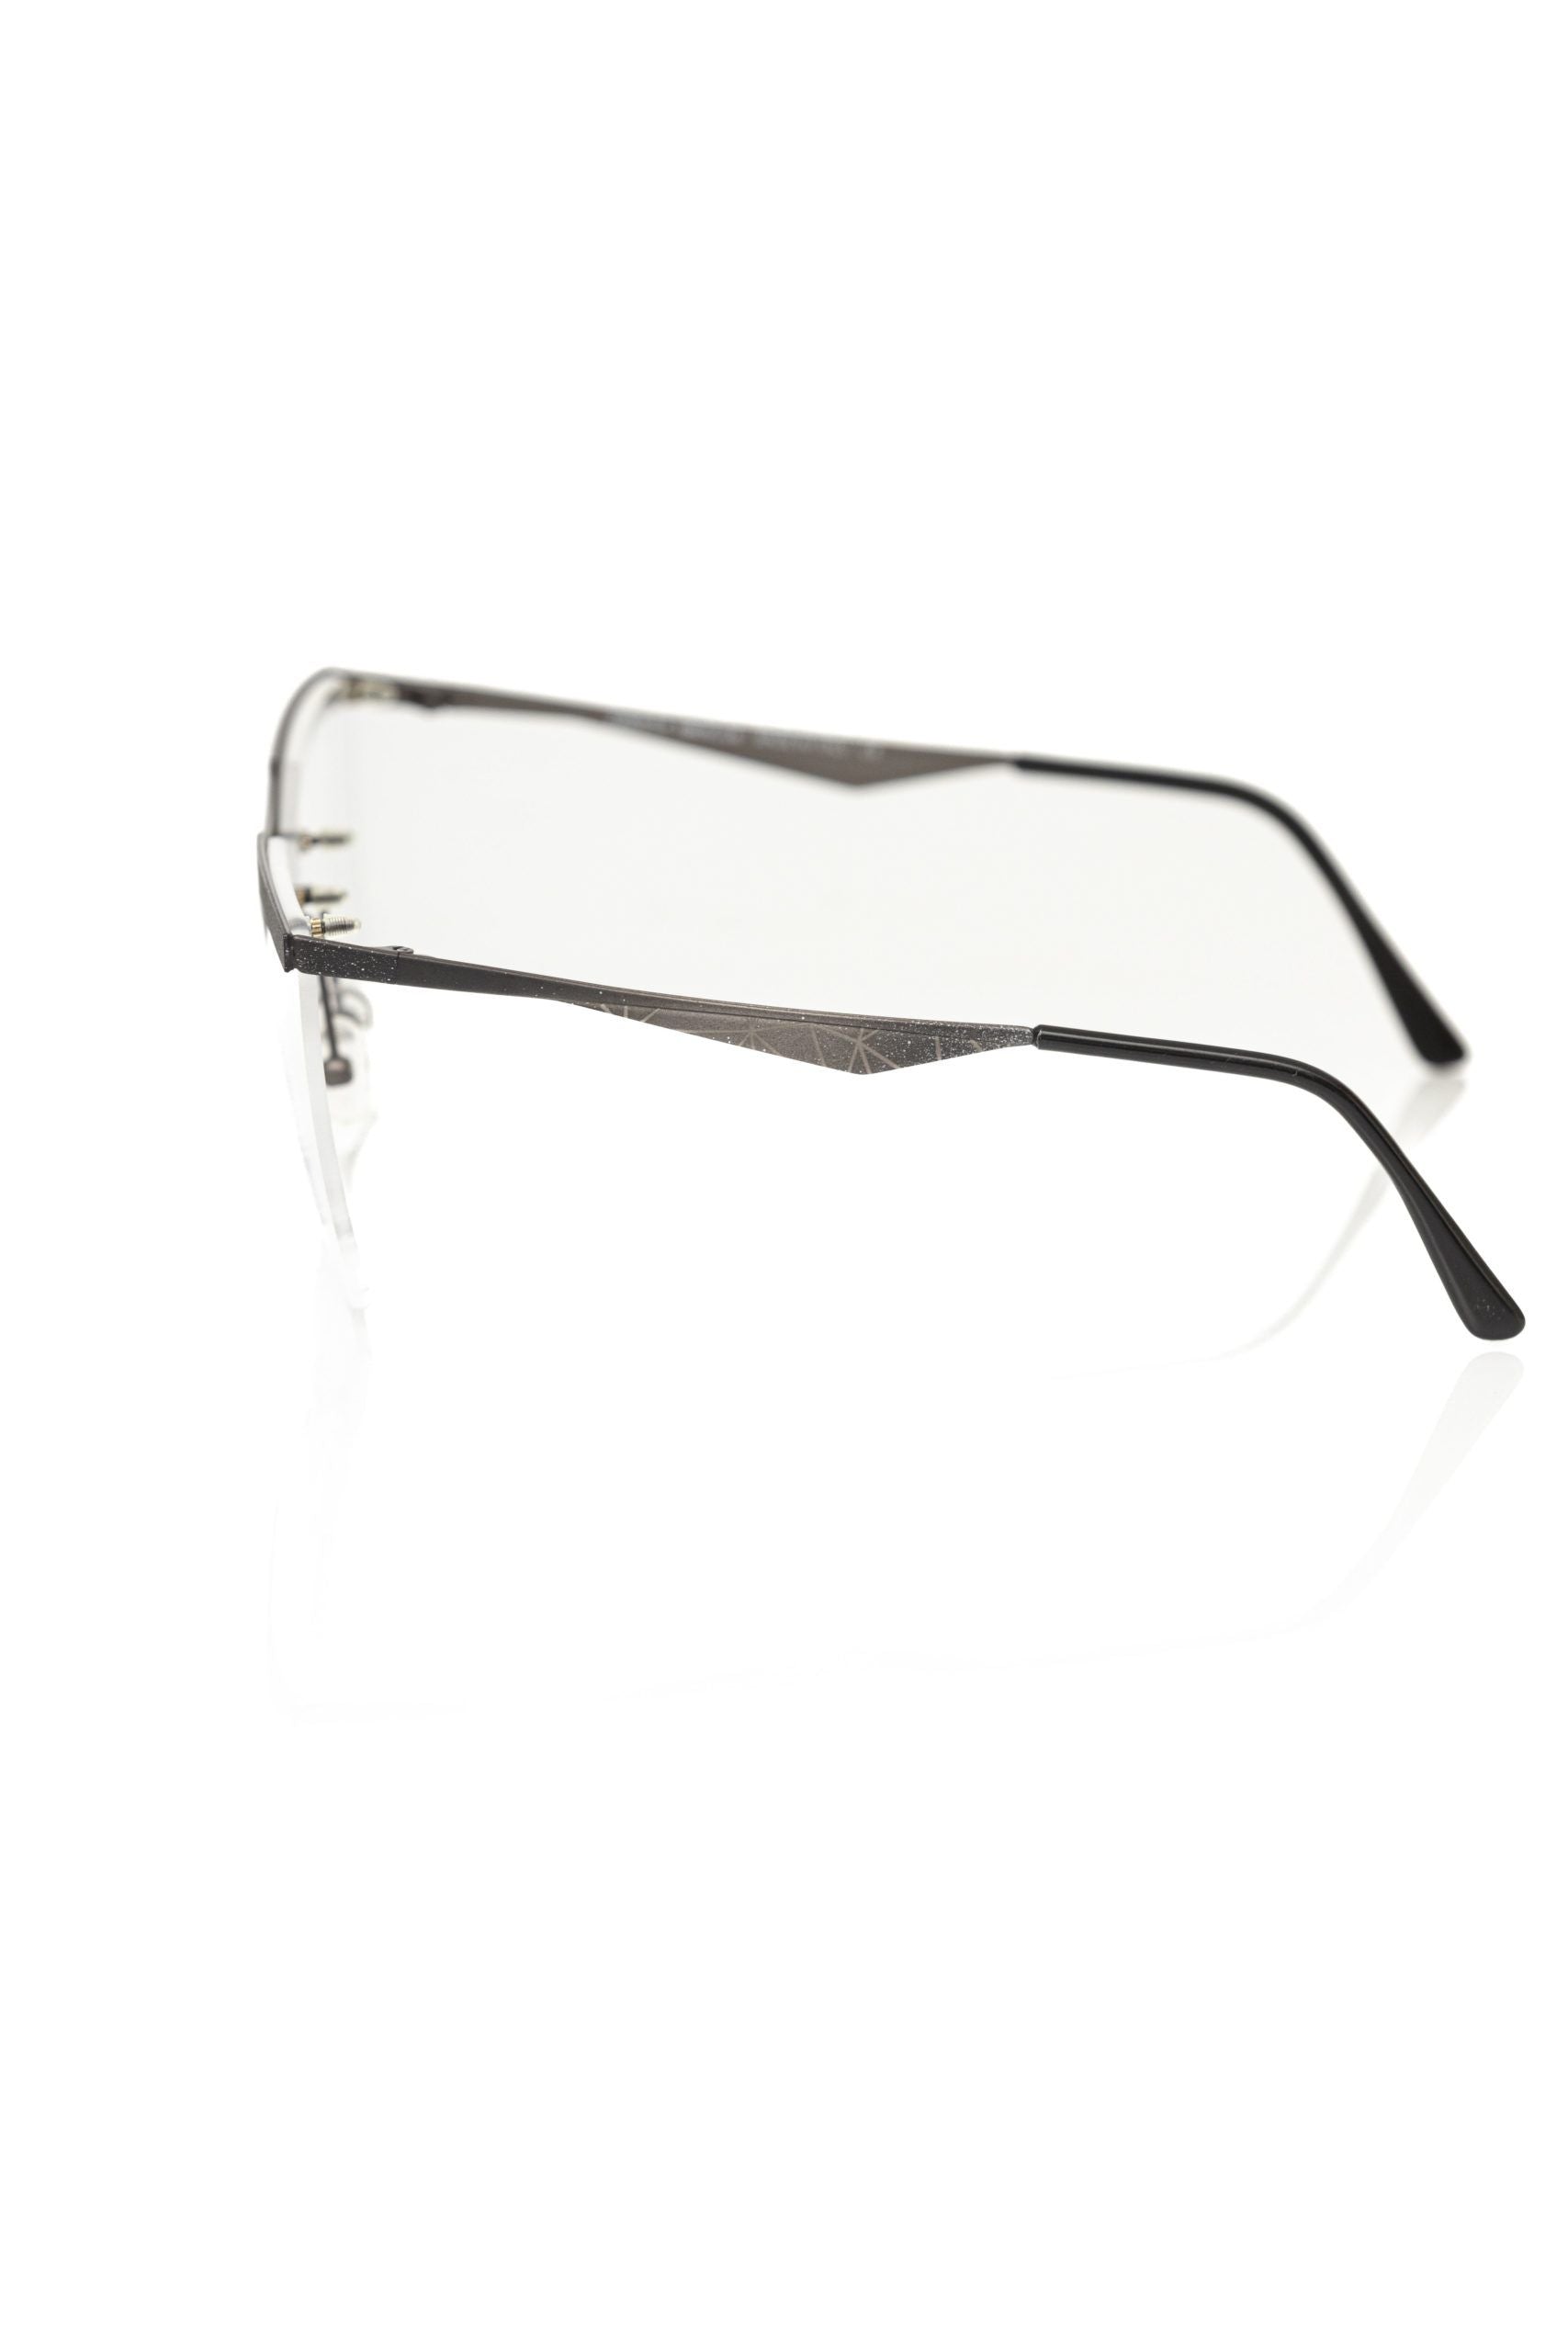 Frankie Morello FRMO-22115 Black Metallic Fibre Frames - Designed by Frankie Morello Available to Buy at a Discounted Price on Moon Behind The Hill Online Designer Discount Store